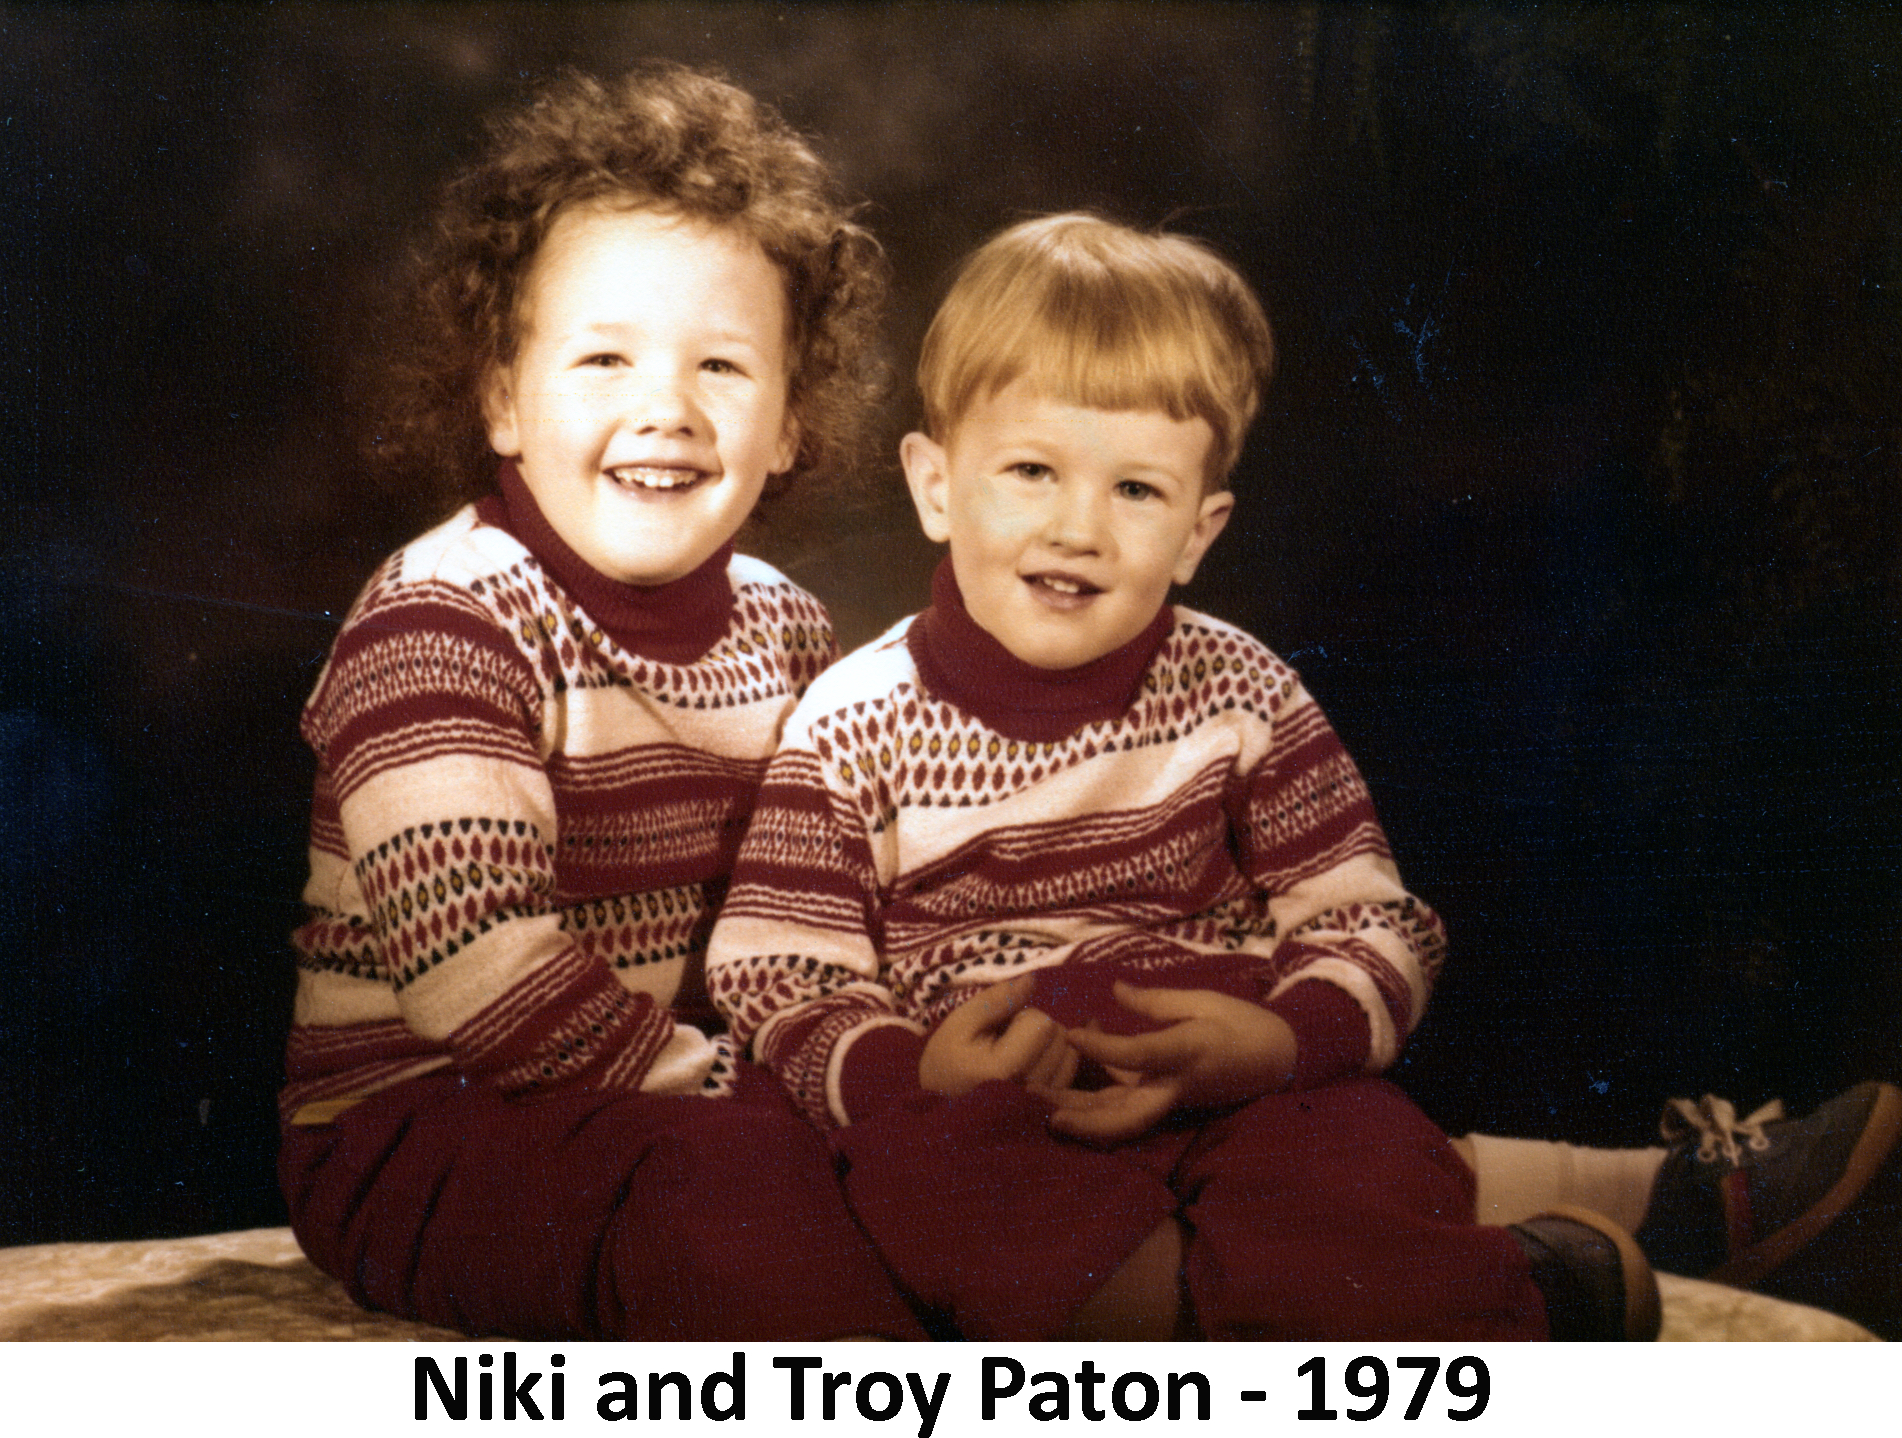 Niki and Troy Paton are sitting together with a dark background in a
              studio photo. Both are wearing matching, red-and-white sweaters.